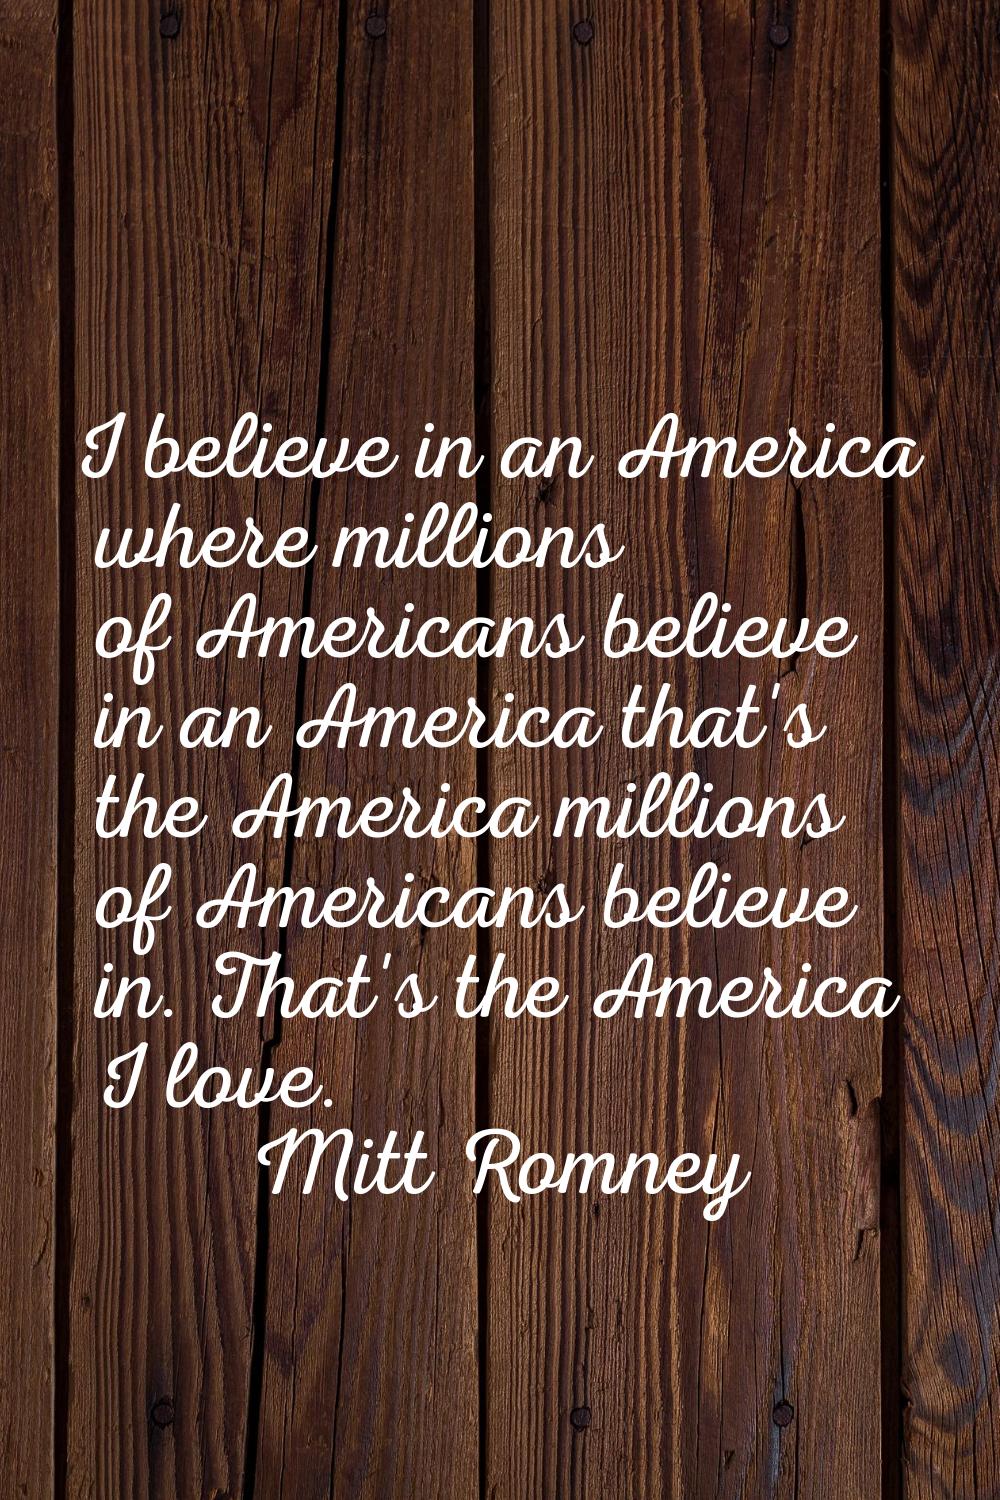 I believe in an America where millions of Americans believe in an America that's the America millio